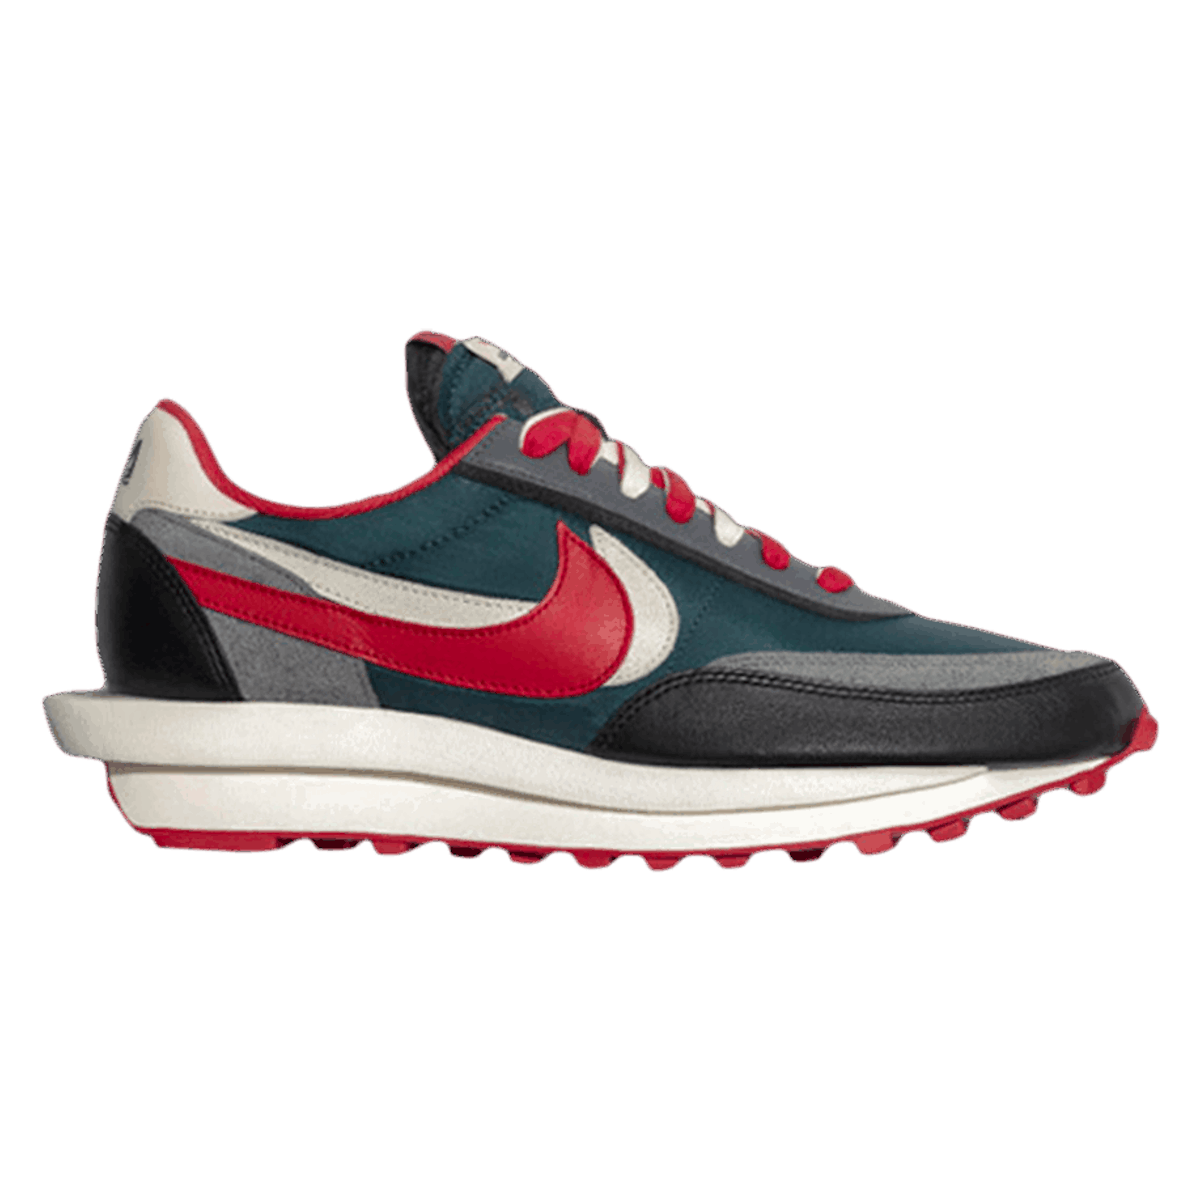 Sacai x Undercover x Nike LDWaffle "Midnight Spruce and University Red"